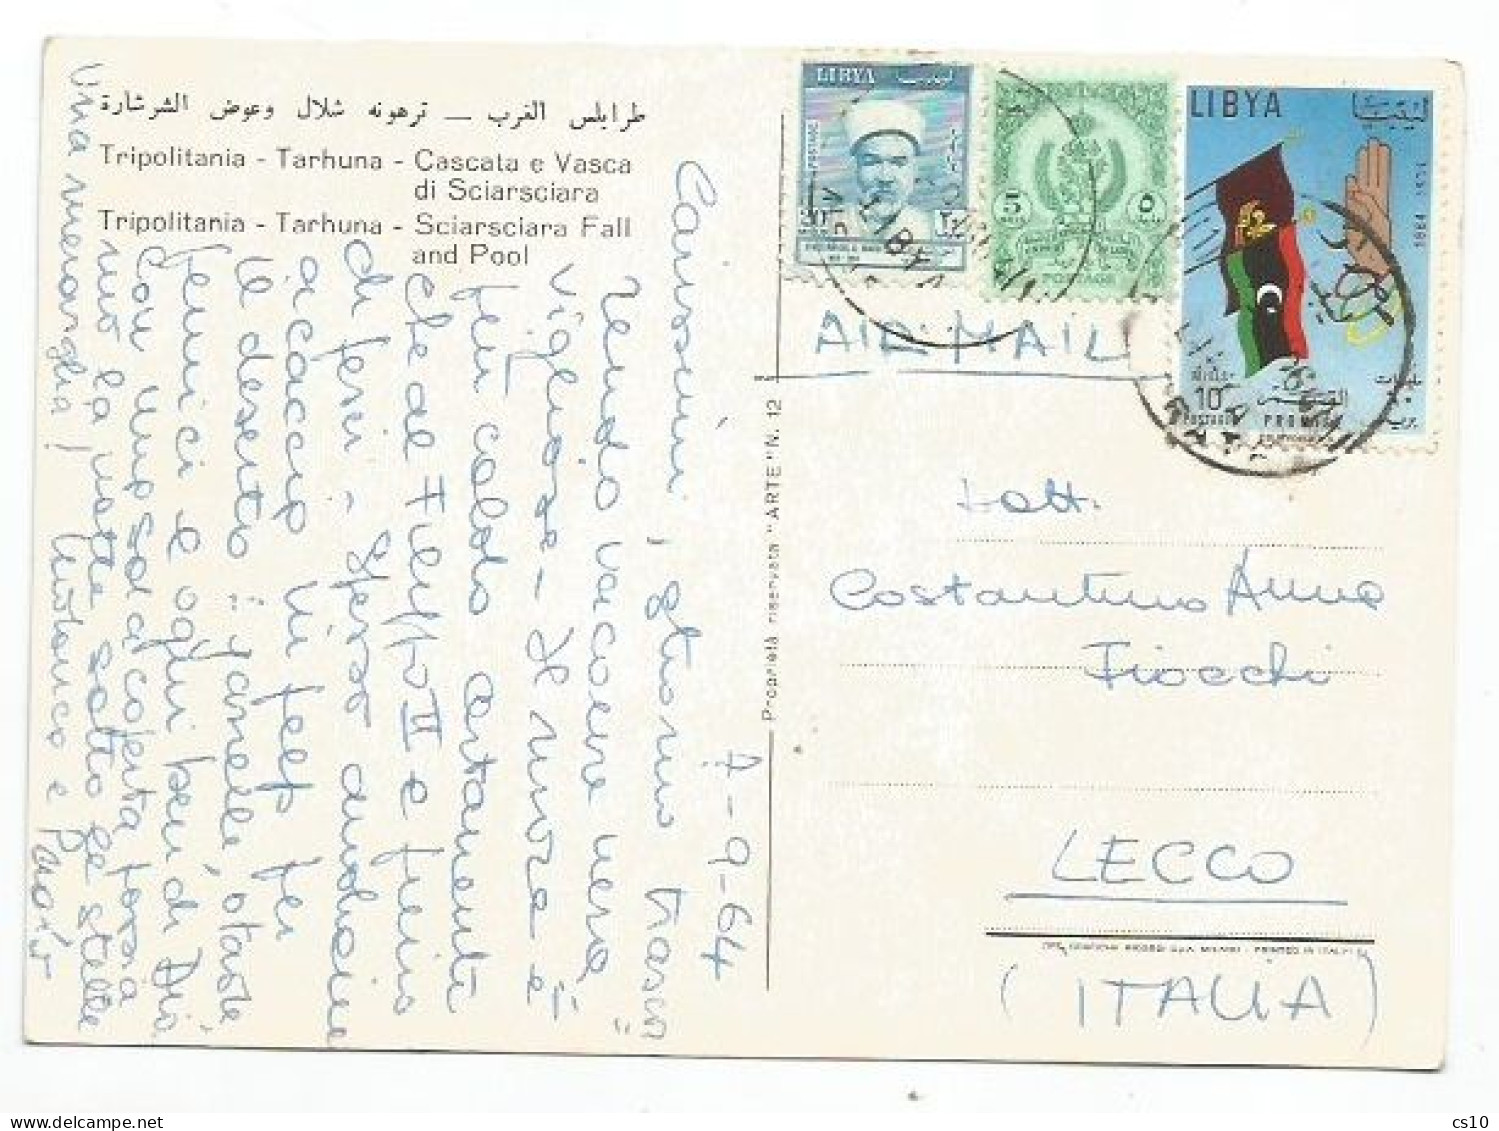 Libya 1962 Boy Scout Meeting 10m Value + Other Pcard Sciarsciara Fall & Pool 7sep1964 X Italy - Lettres & Documents